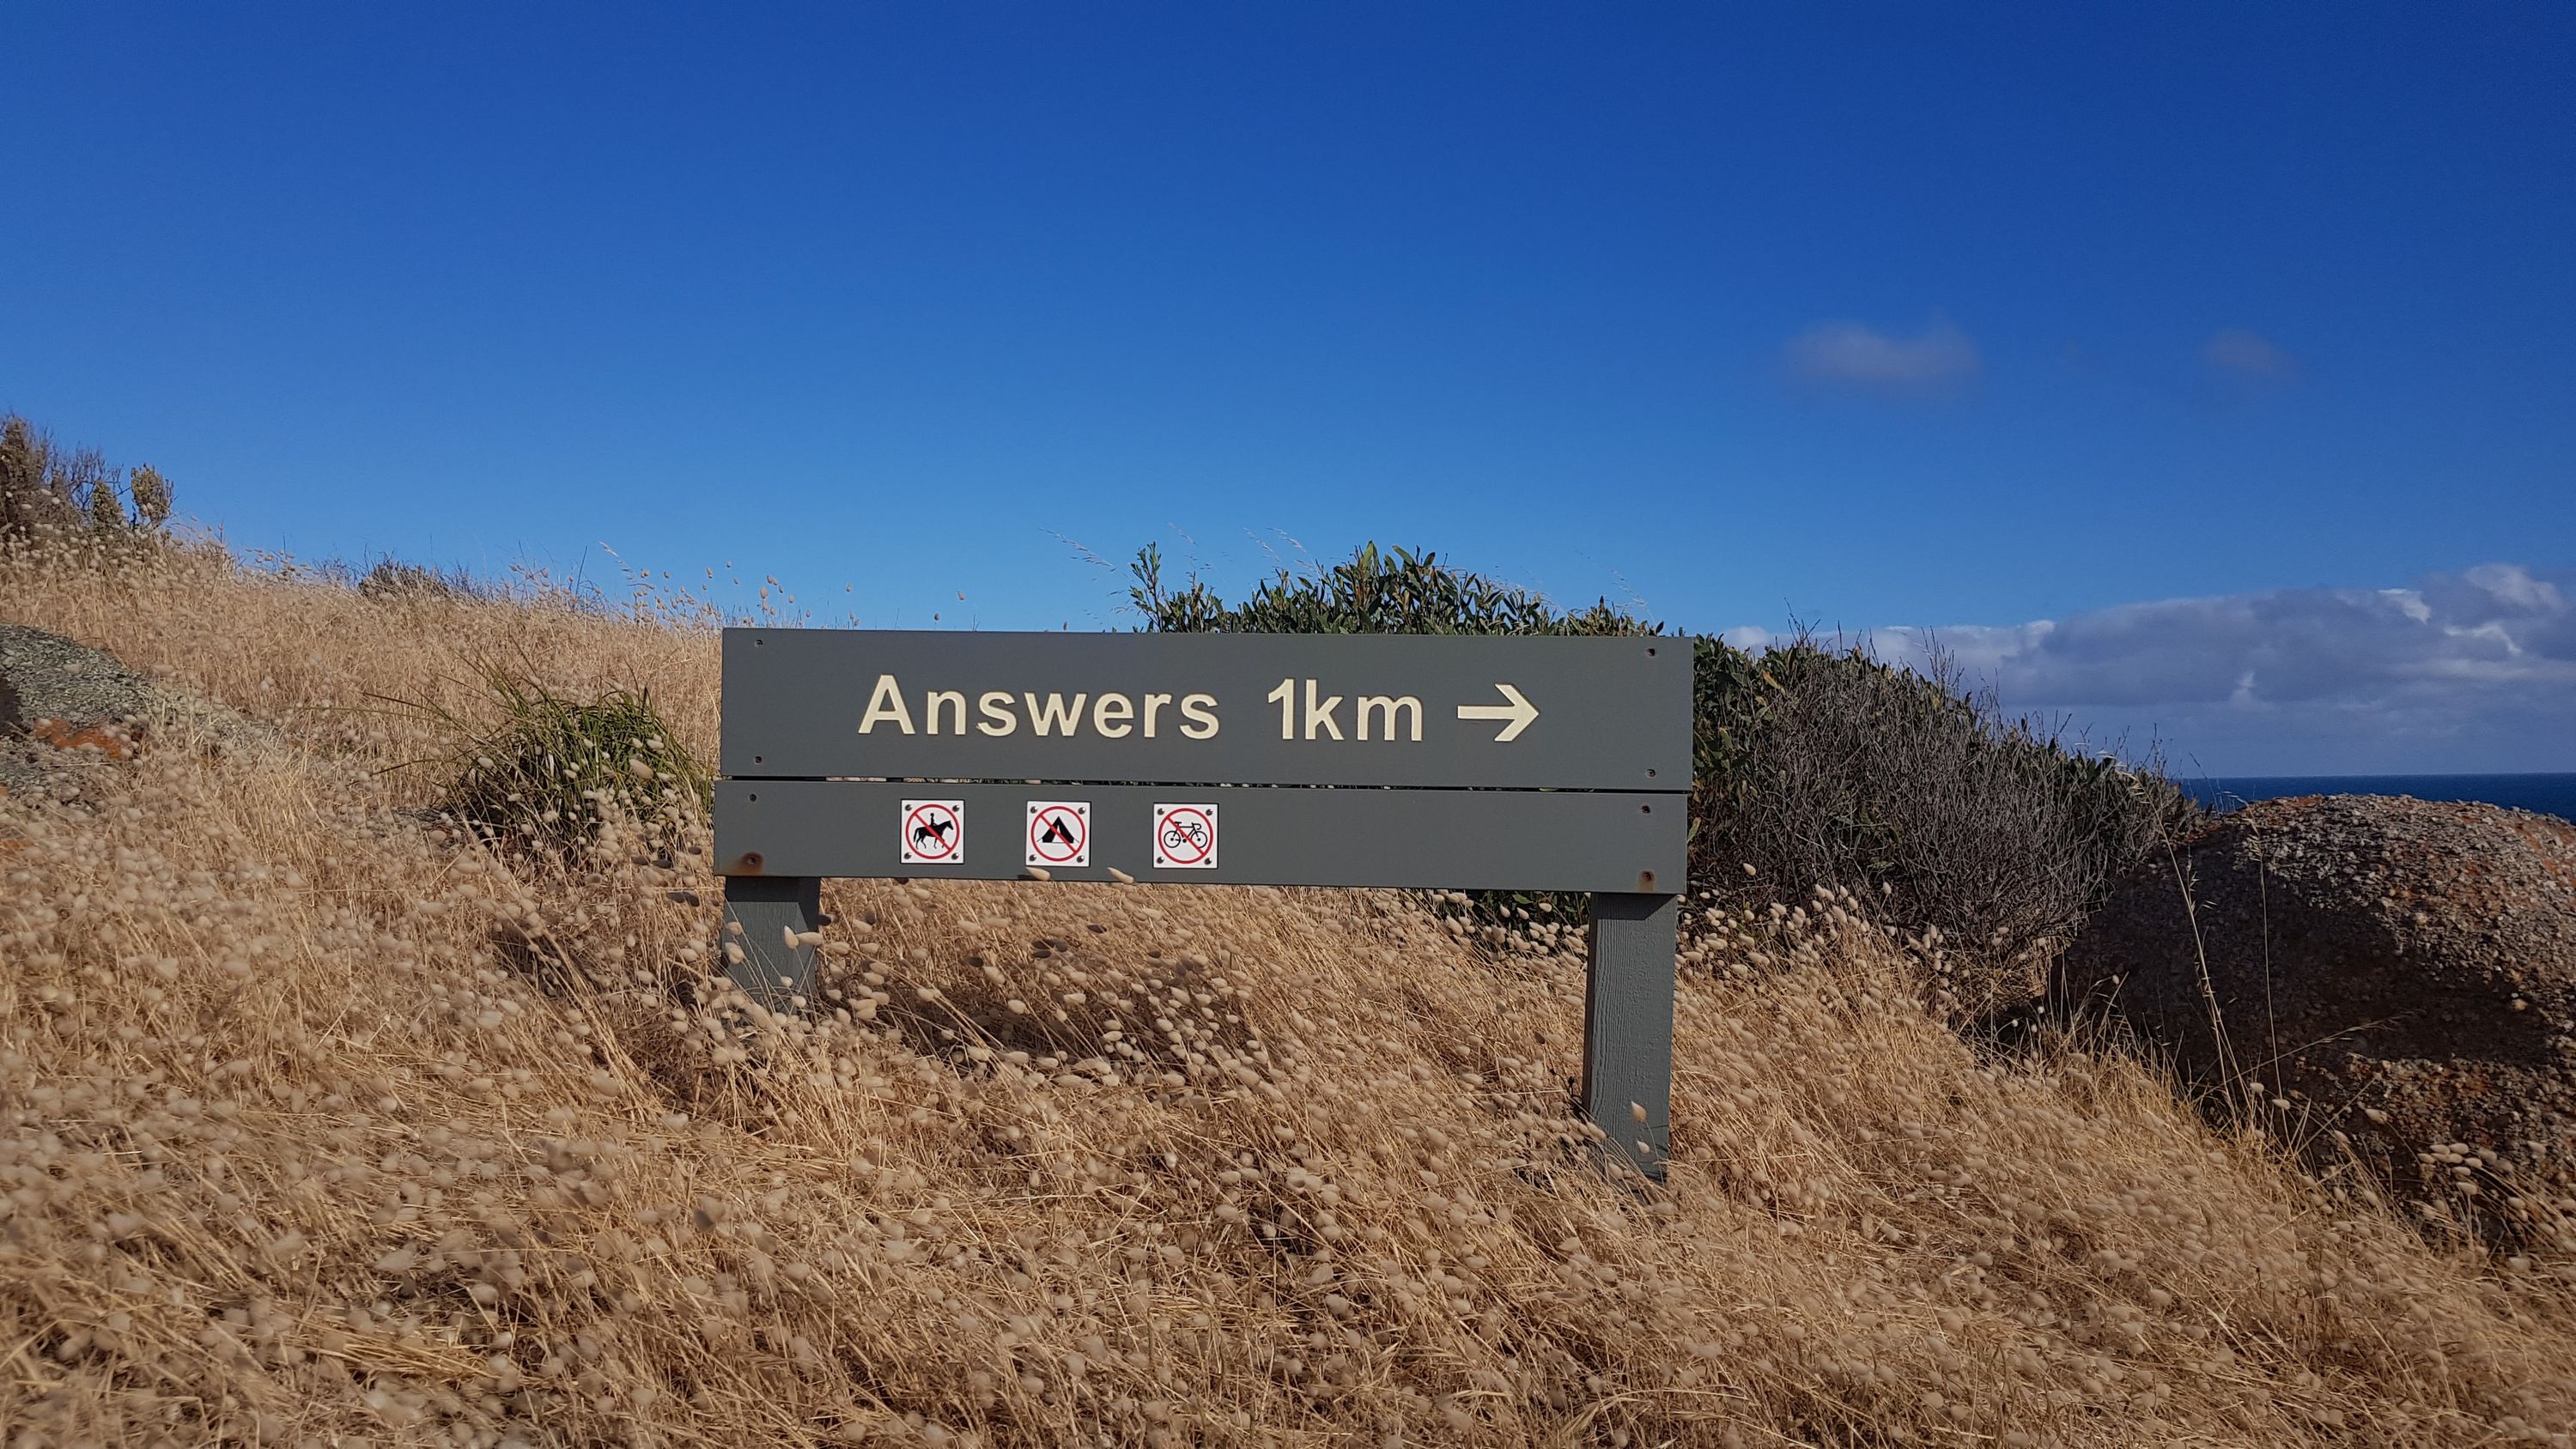 Photo of a road sign reading ‘Answers 1km’ with an arrow pointing right